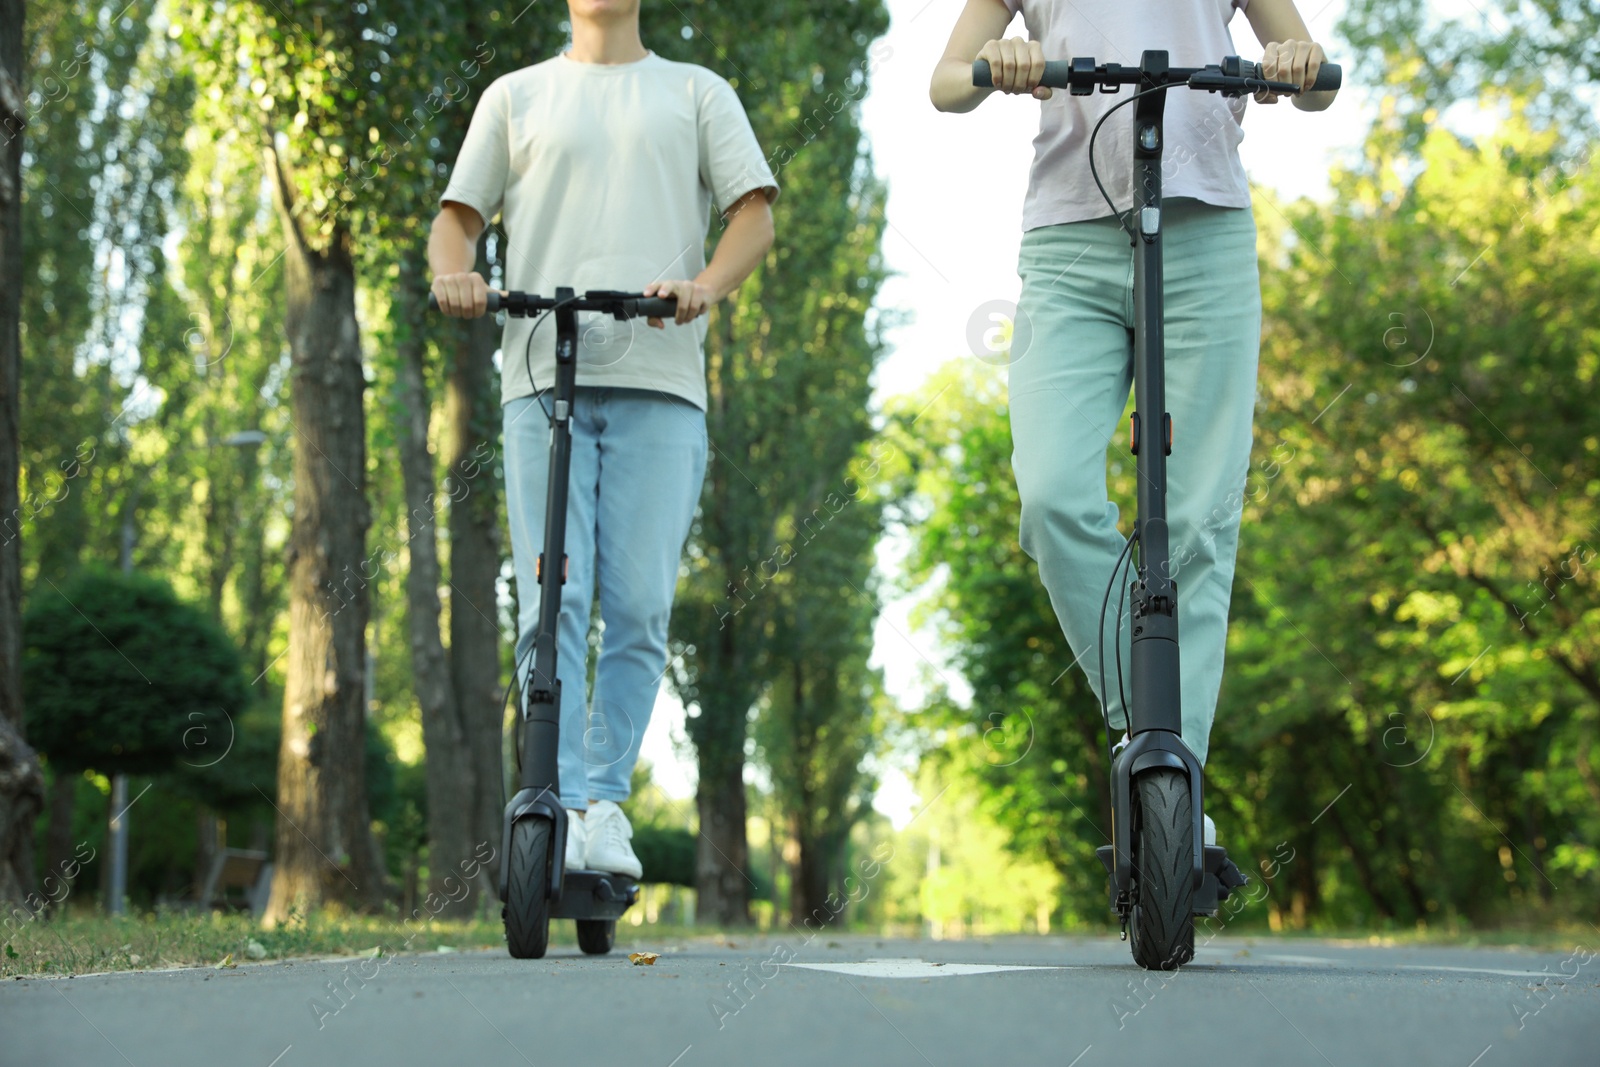 Photo of Couple riding modern electric kick scooters in park, closeup